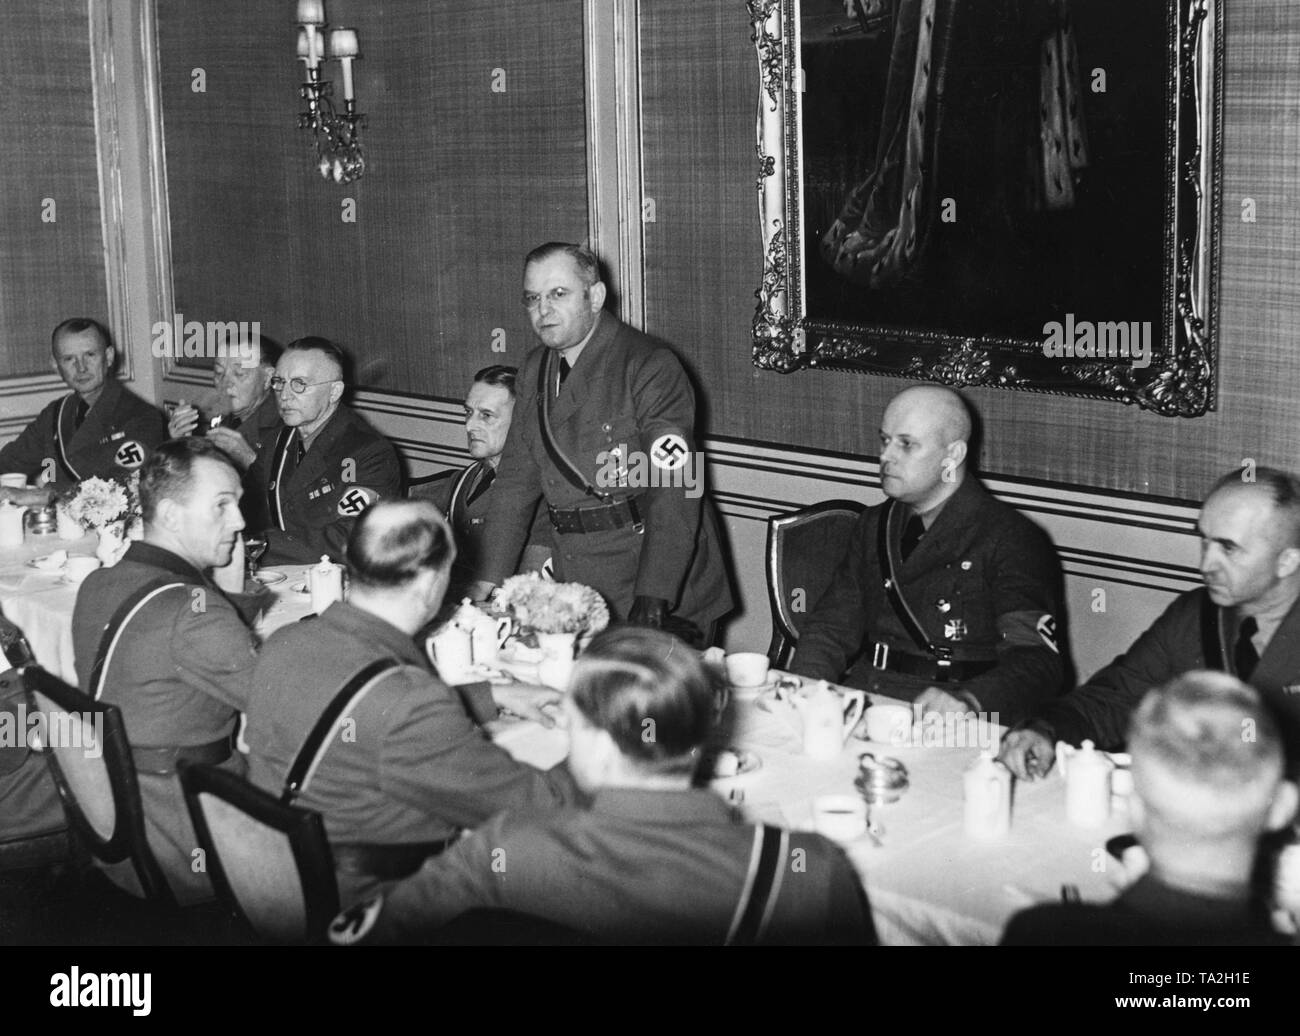 On the occasion of the 16th anniversary of the Stahlhelm, leader Franz Seldte (center, standing) speaks to the press at the 'Magdeburger Hof' hotel. On the left beside him, the leader Hubold, to his right, chief press officer of the Stahlhelm, Hans von Wick. Stock Photo